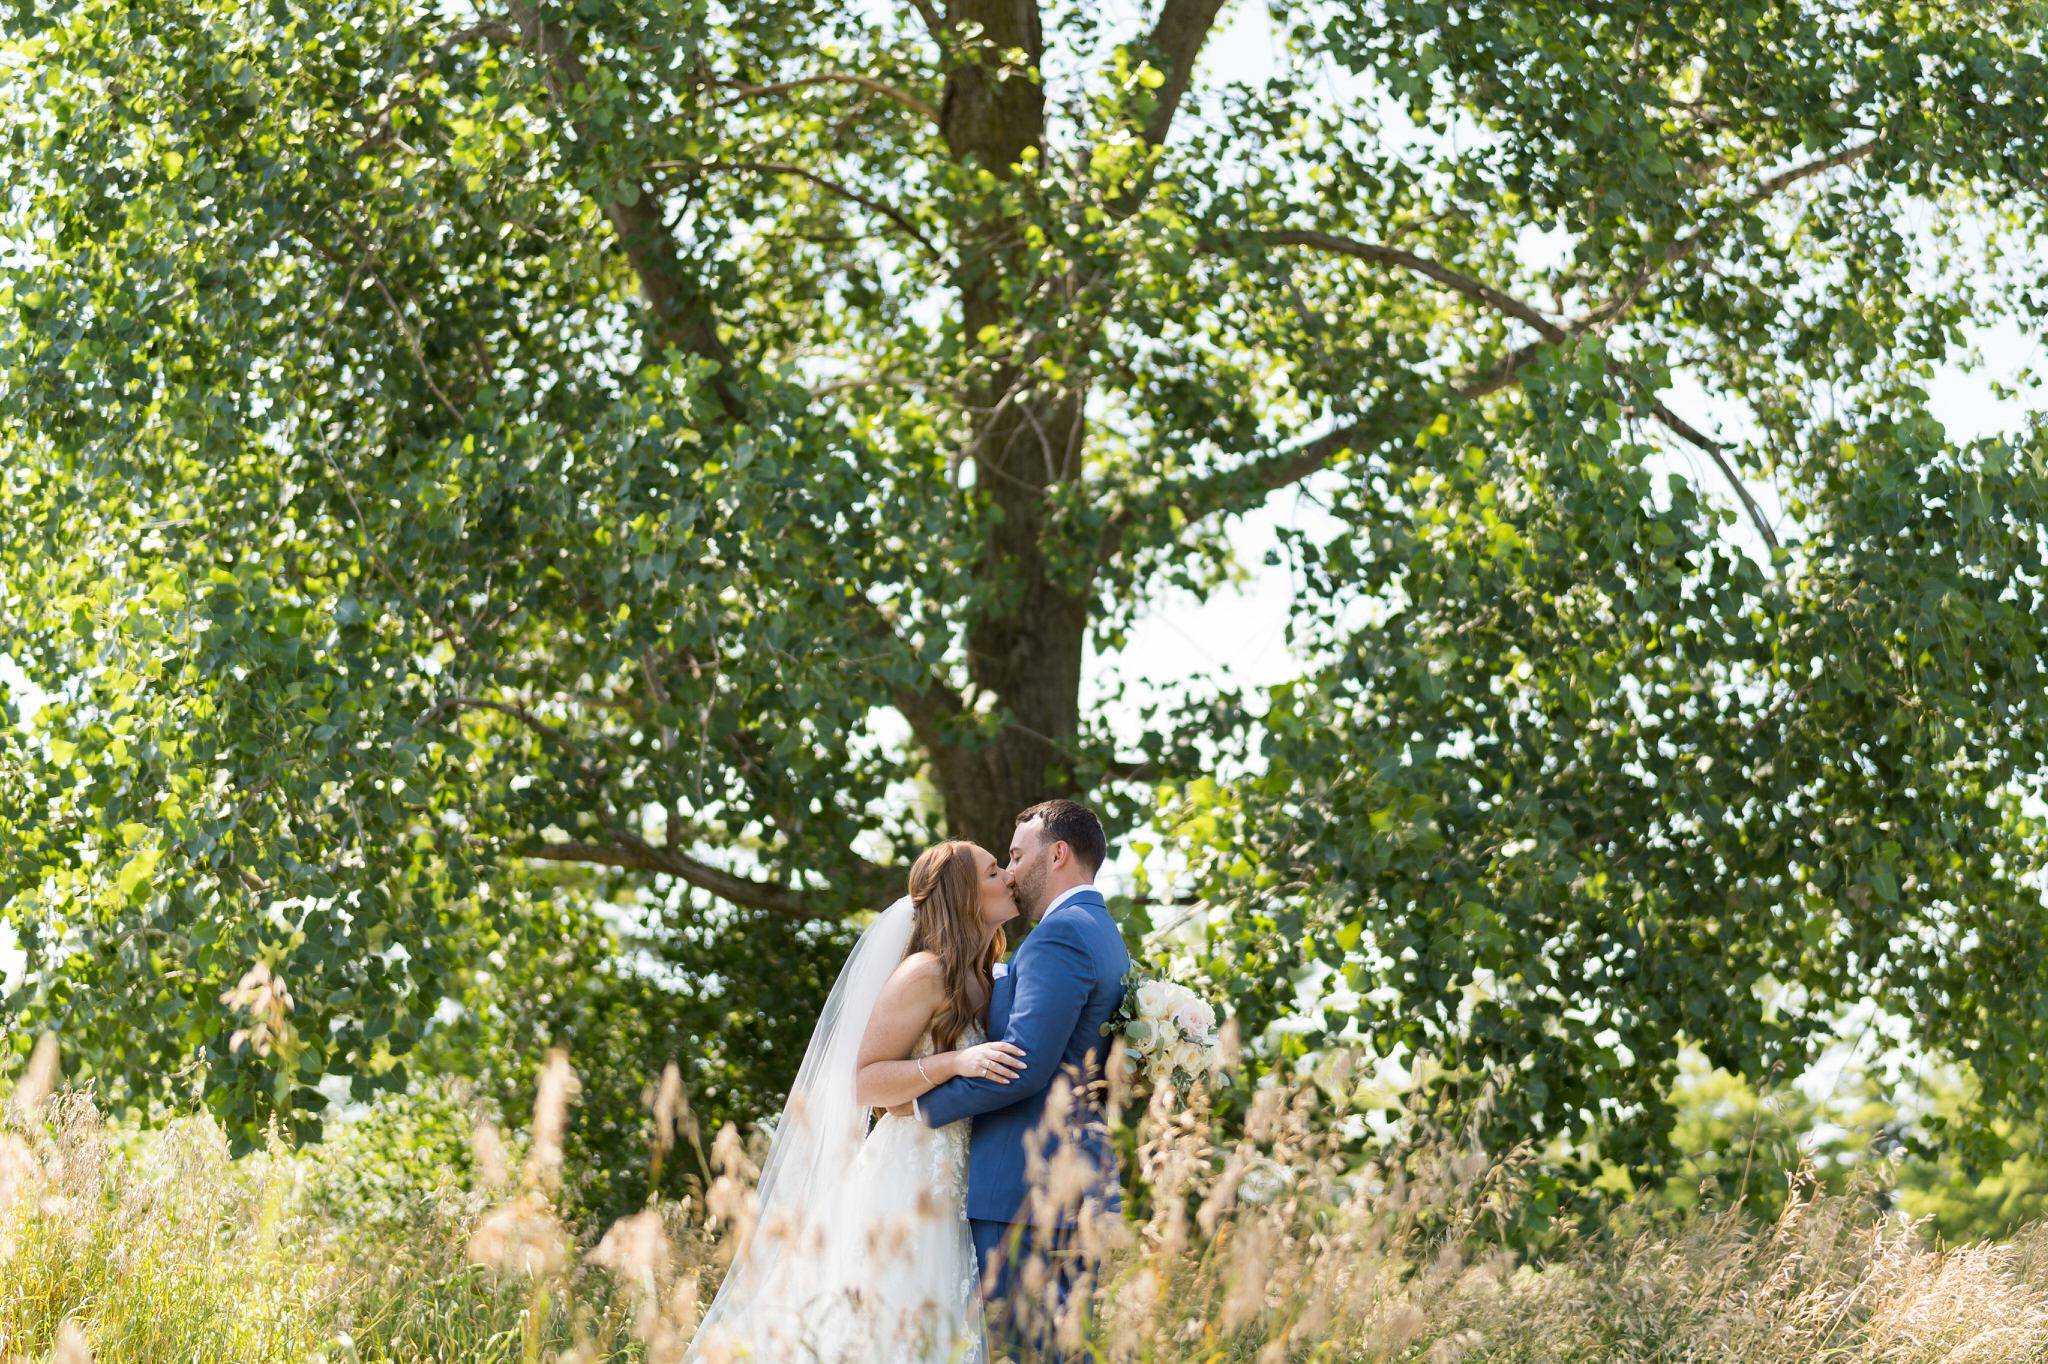 Standing in tall grass, a bride and groom kiss with a tree in the background at Greystone Golf Club.  